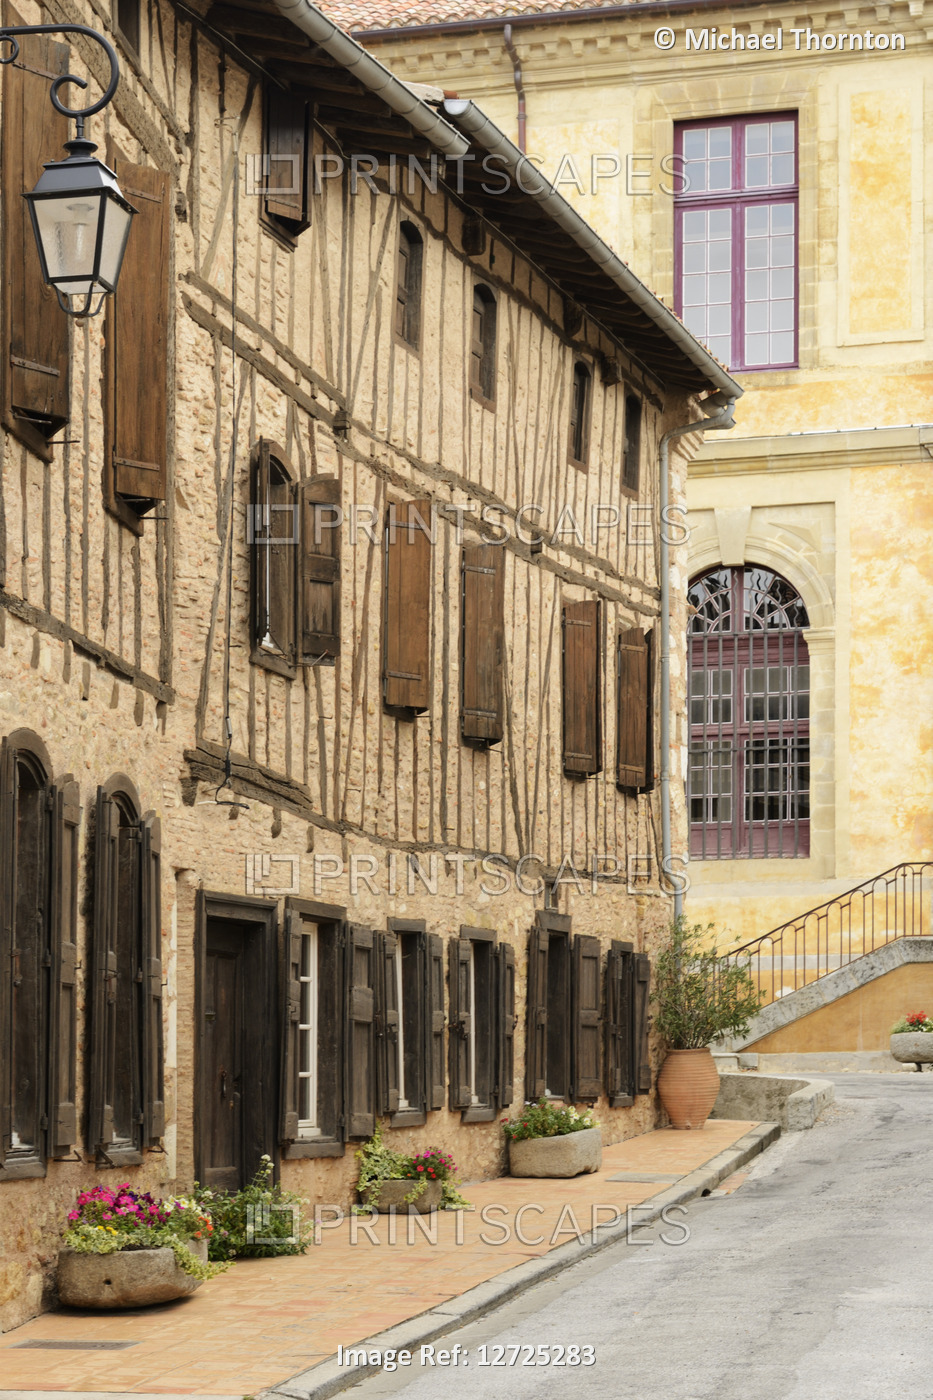 The Old and New Buildings, Soreze, Tarn, Midi-Pyrenees, France